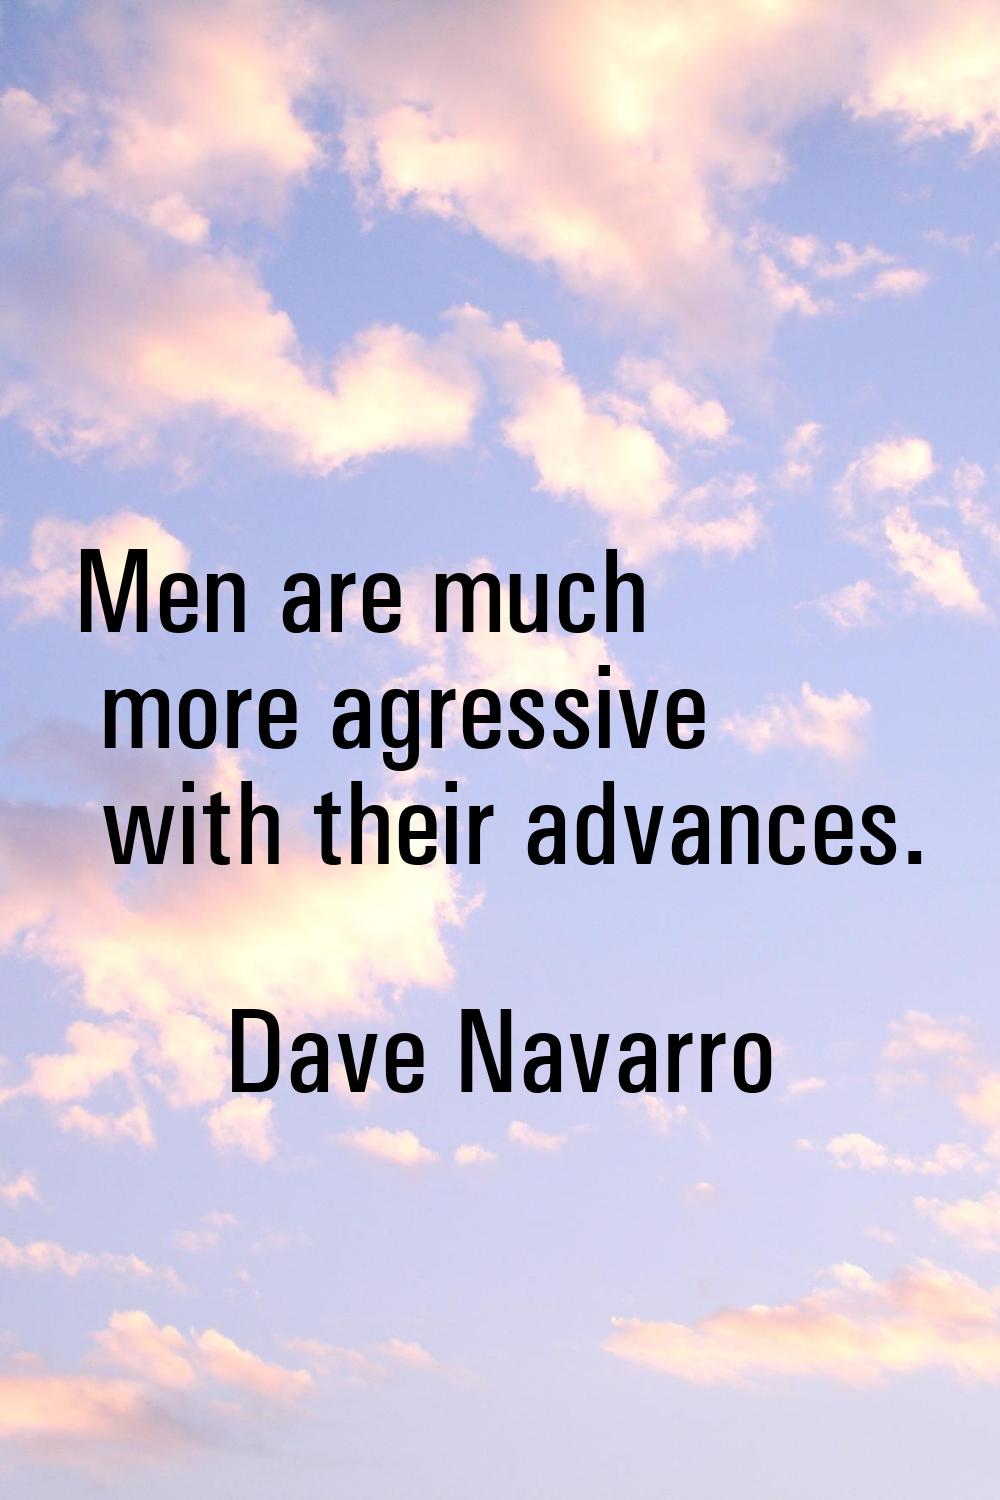 Men are much more agressive with their advances.